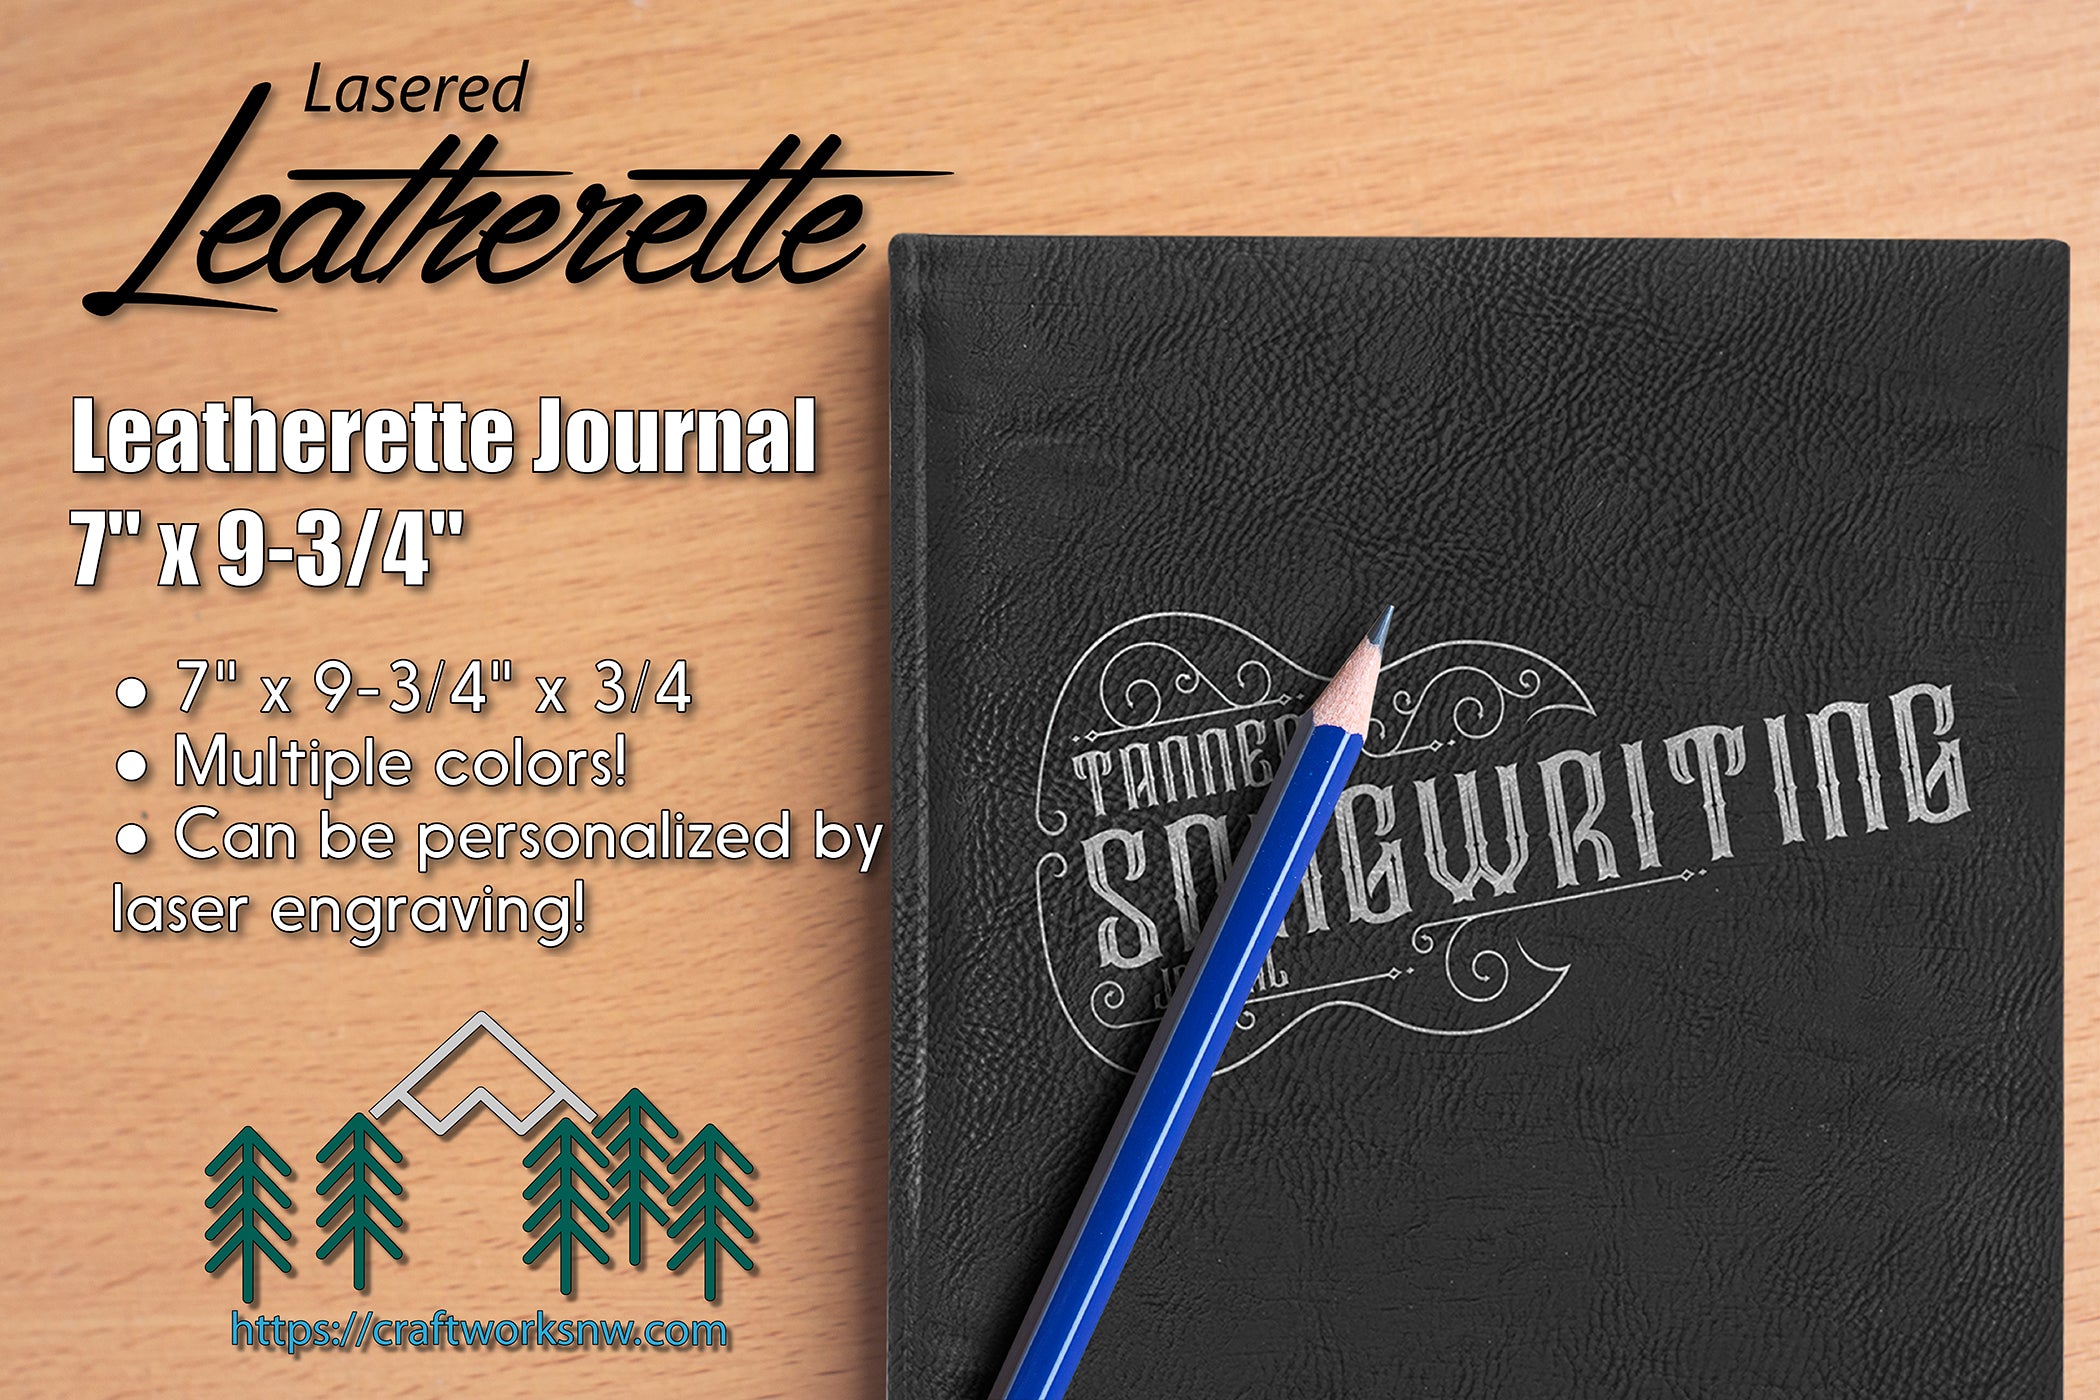 Journal, 7" x 9-3/4" Laserable Leatherette - Craftworks NW, LLC